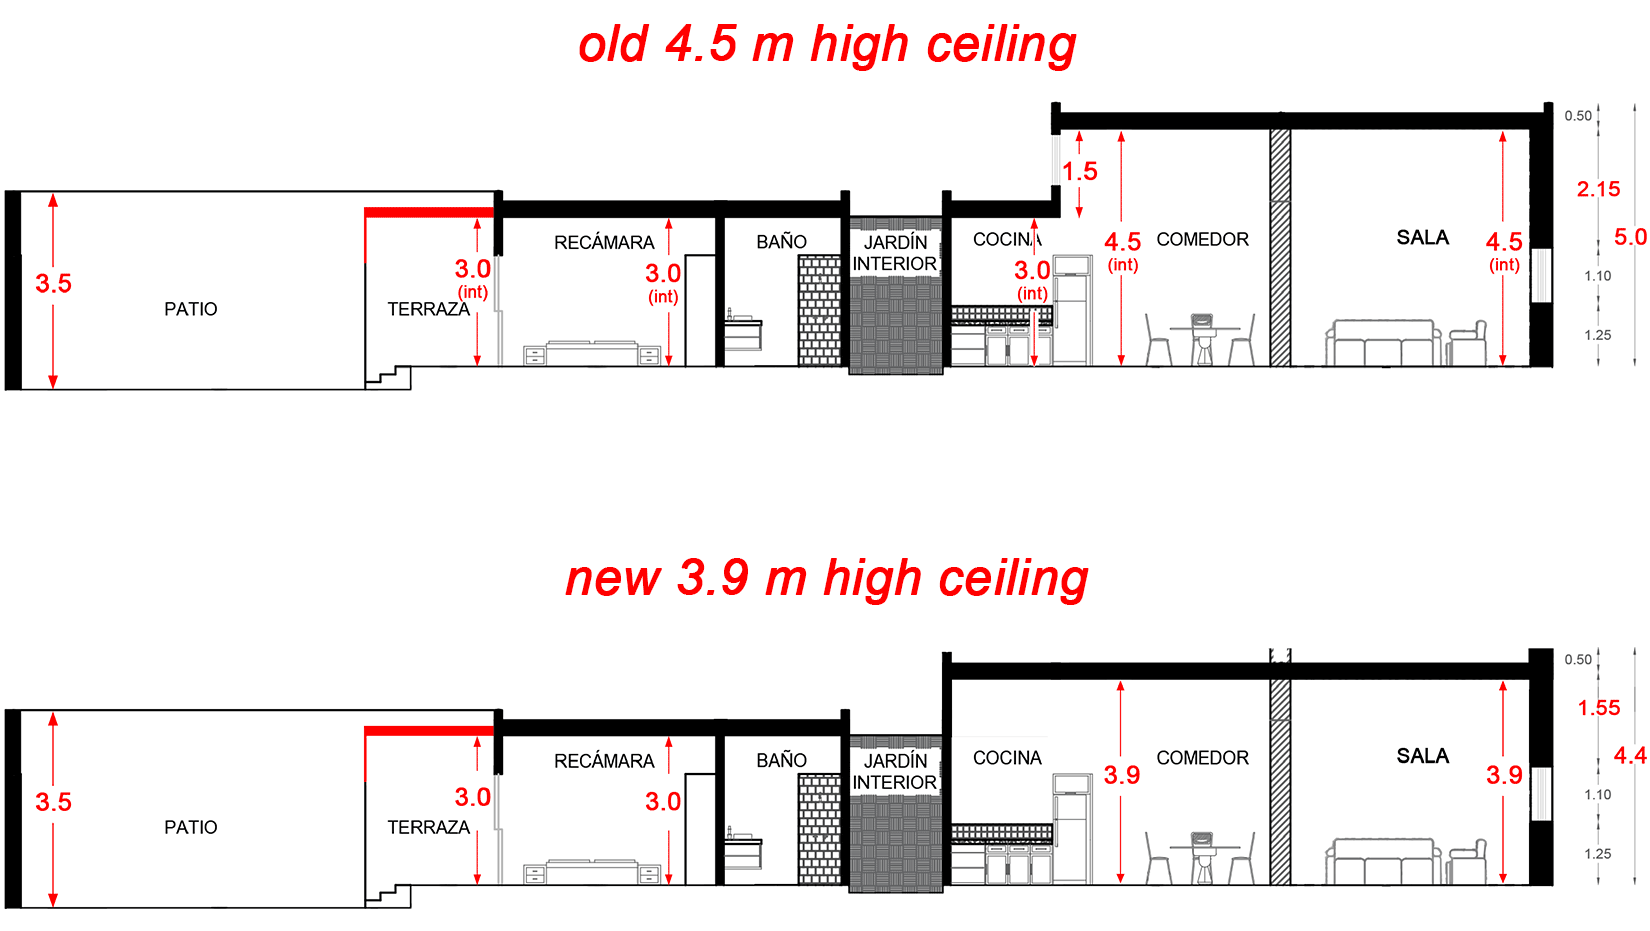 side view of revised ceiling height